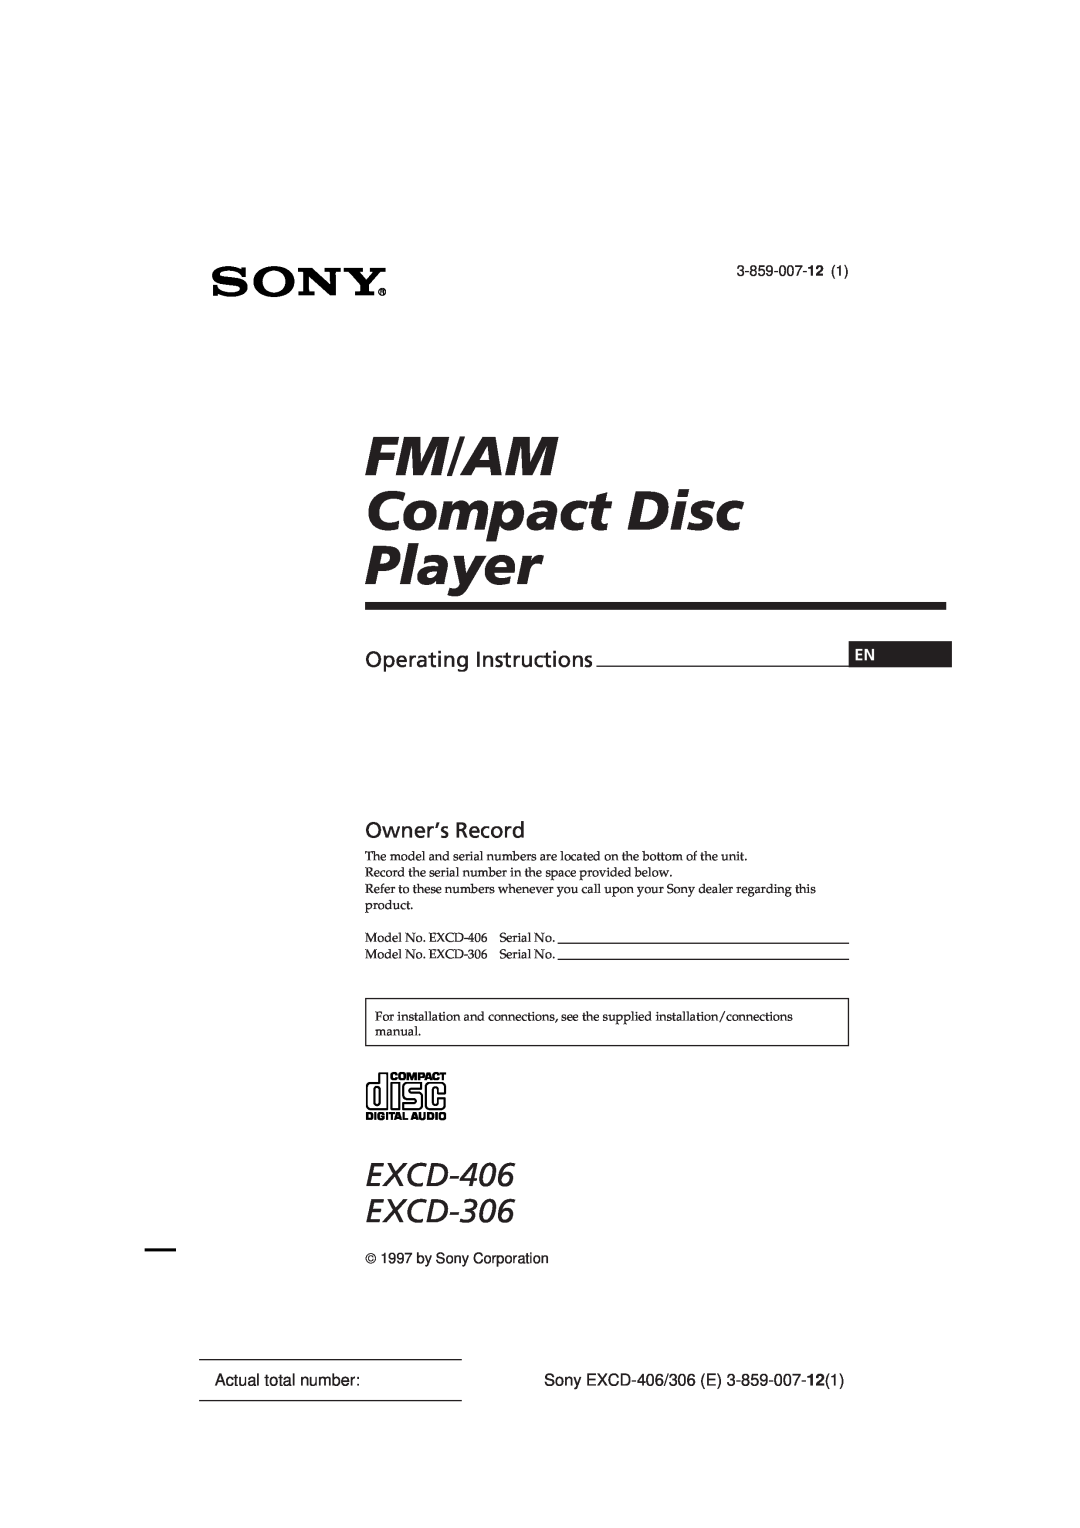 Sony EXCD-306 operating instructions Actual total number, 3-859-007-12, by Sony Corporation, Sony EXCD-406/306E 